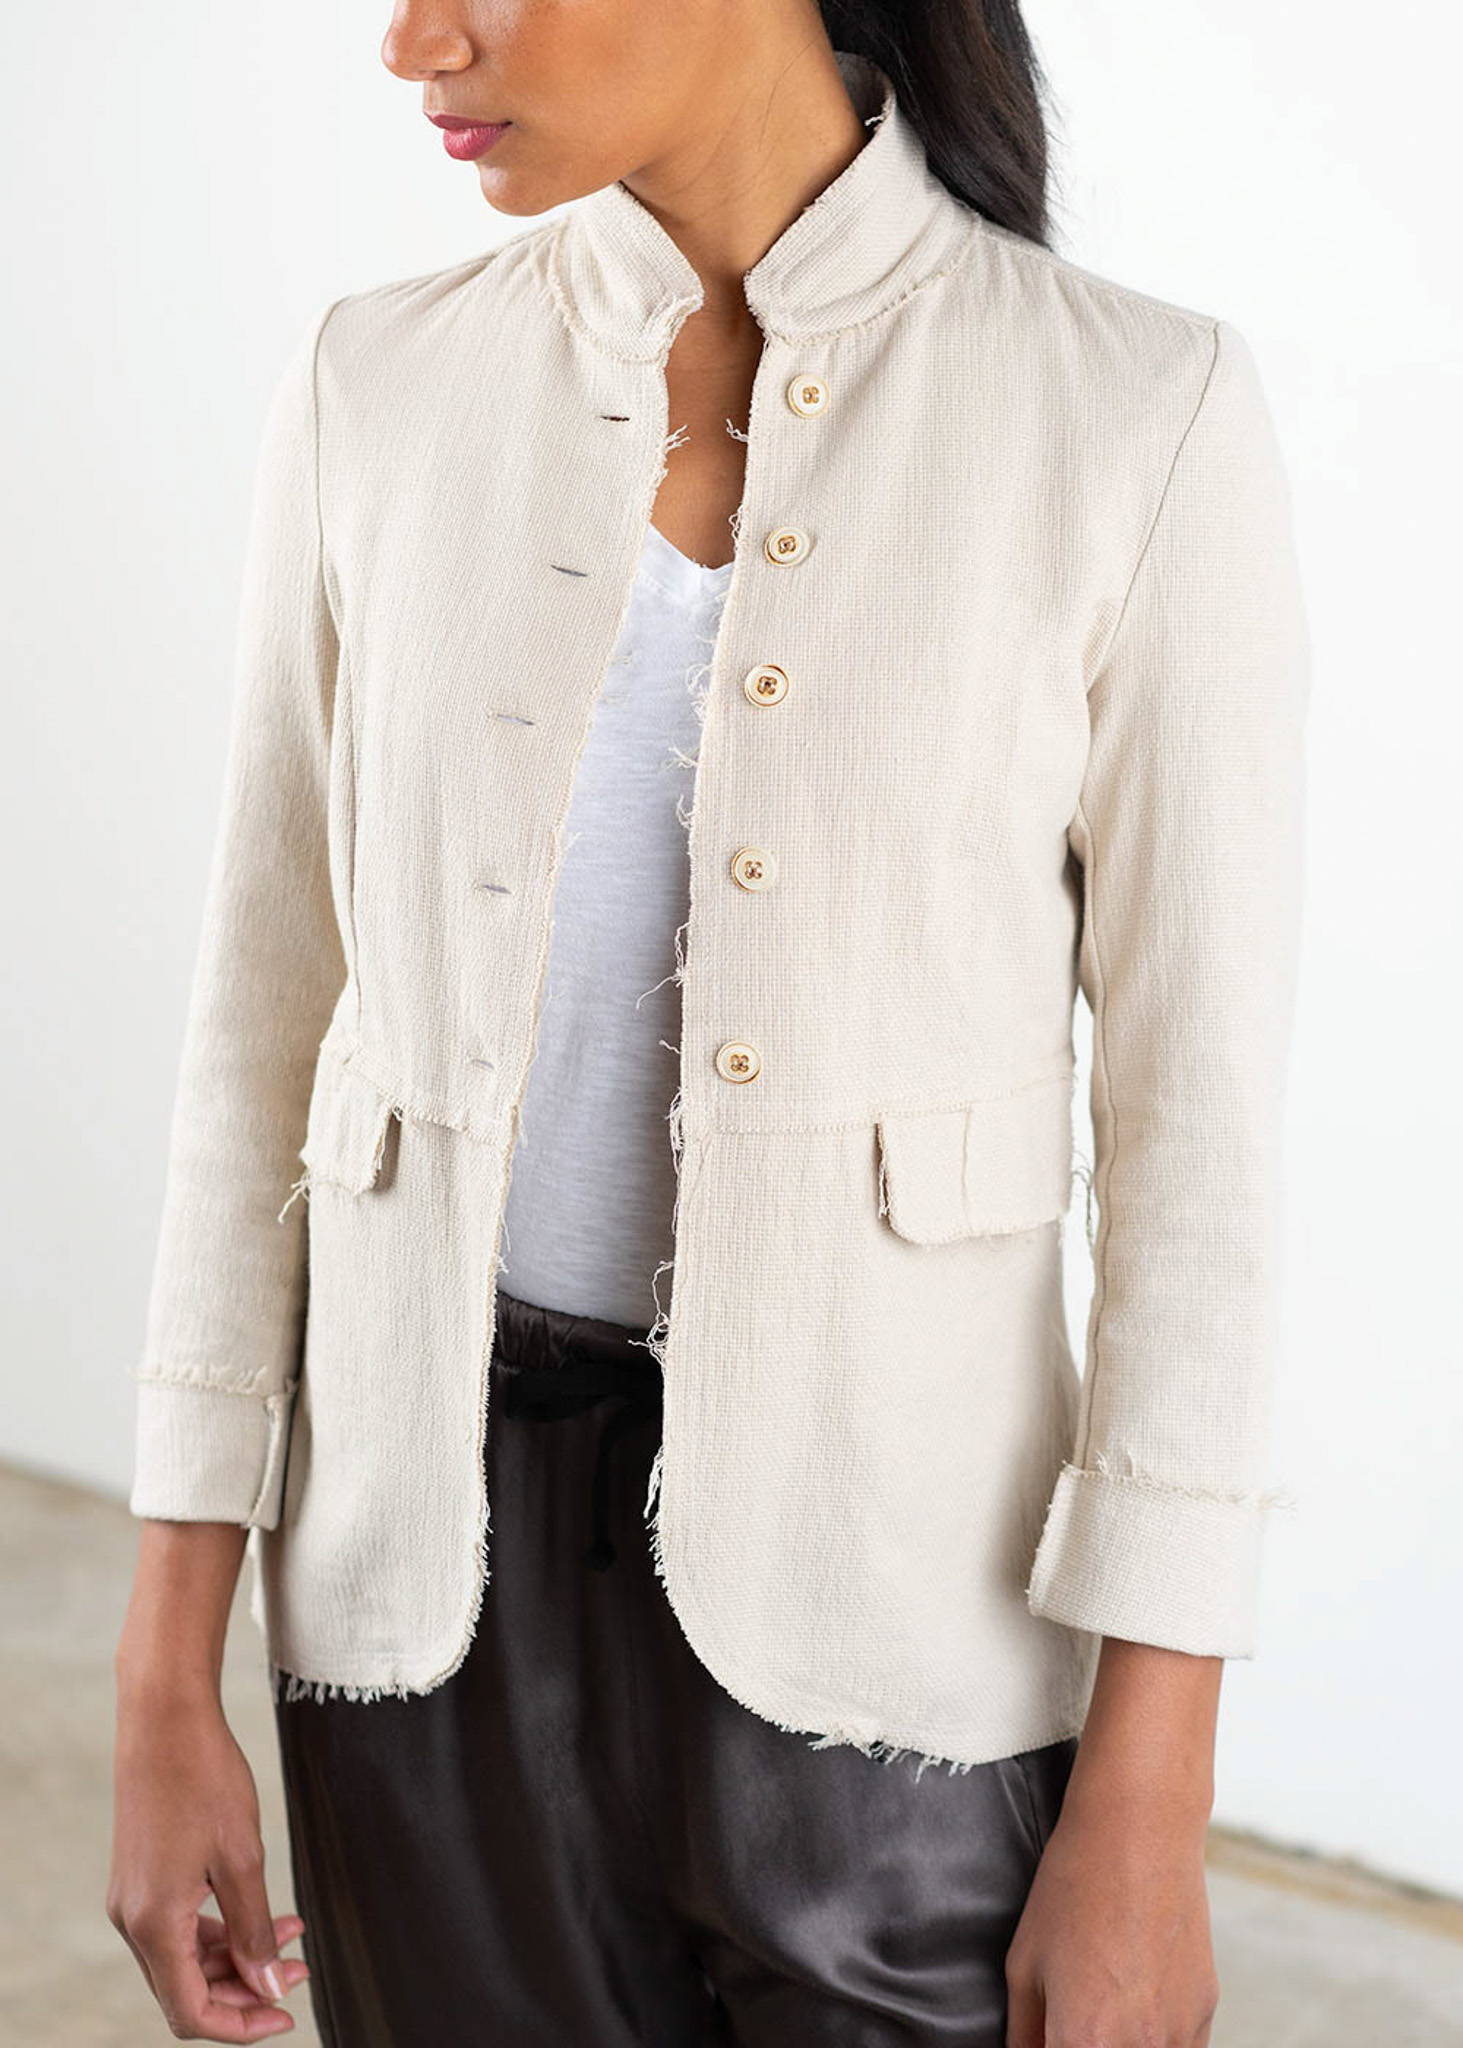 A model wearing a white cotton mix jacket with raw hem detailing over a white top and dark grey trousers